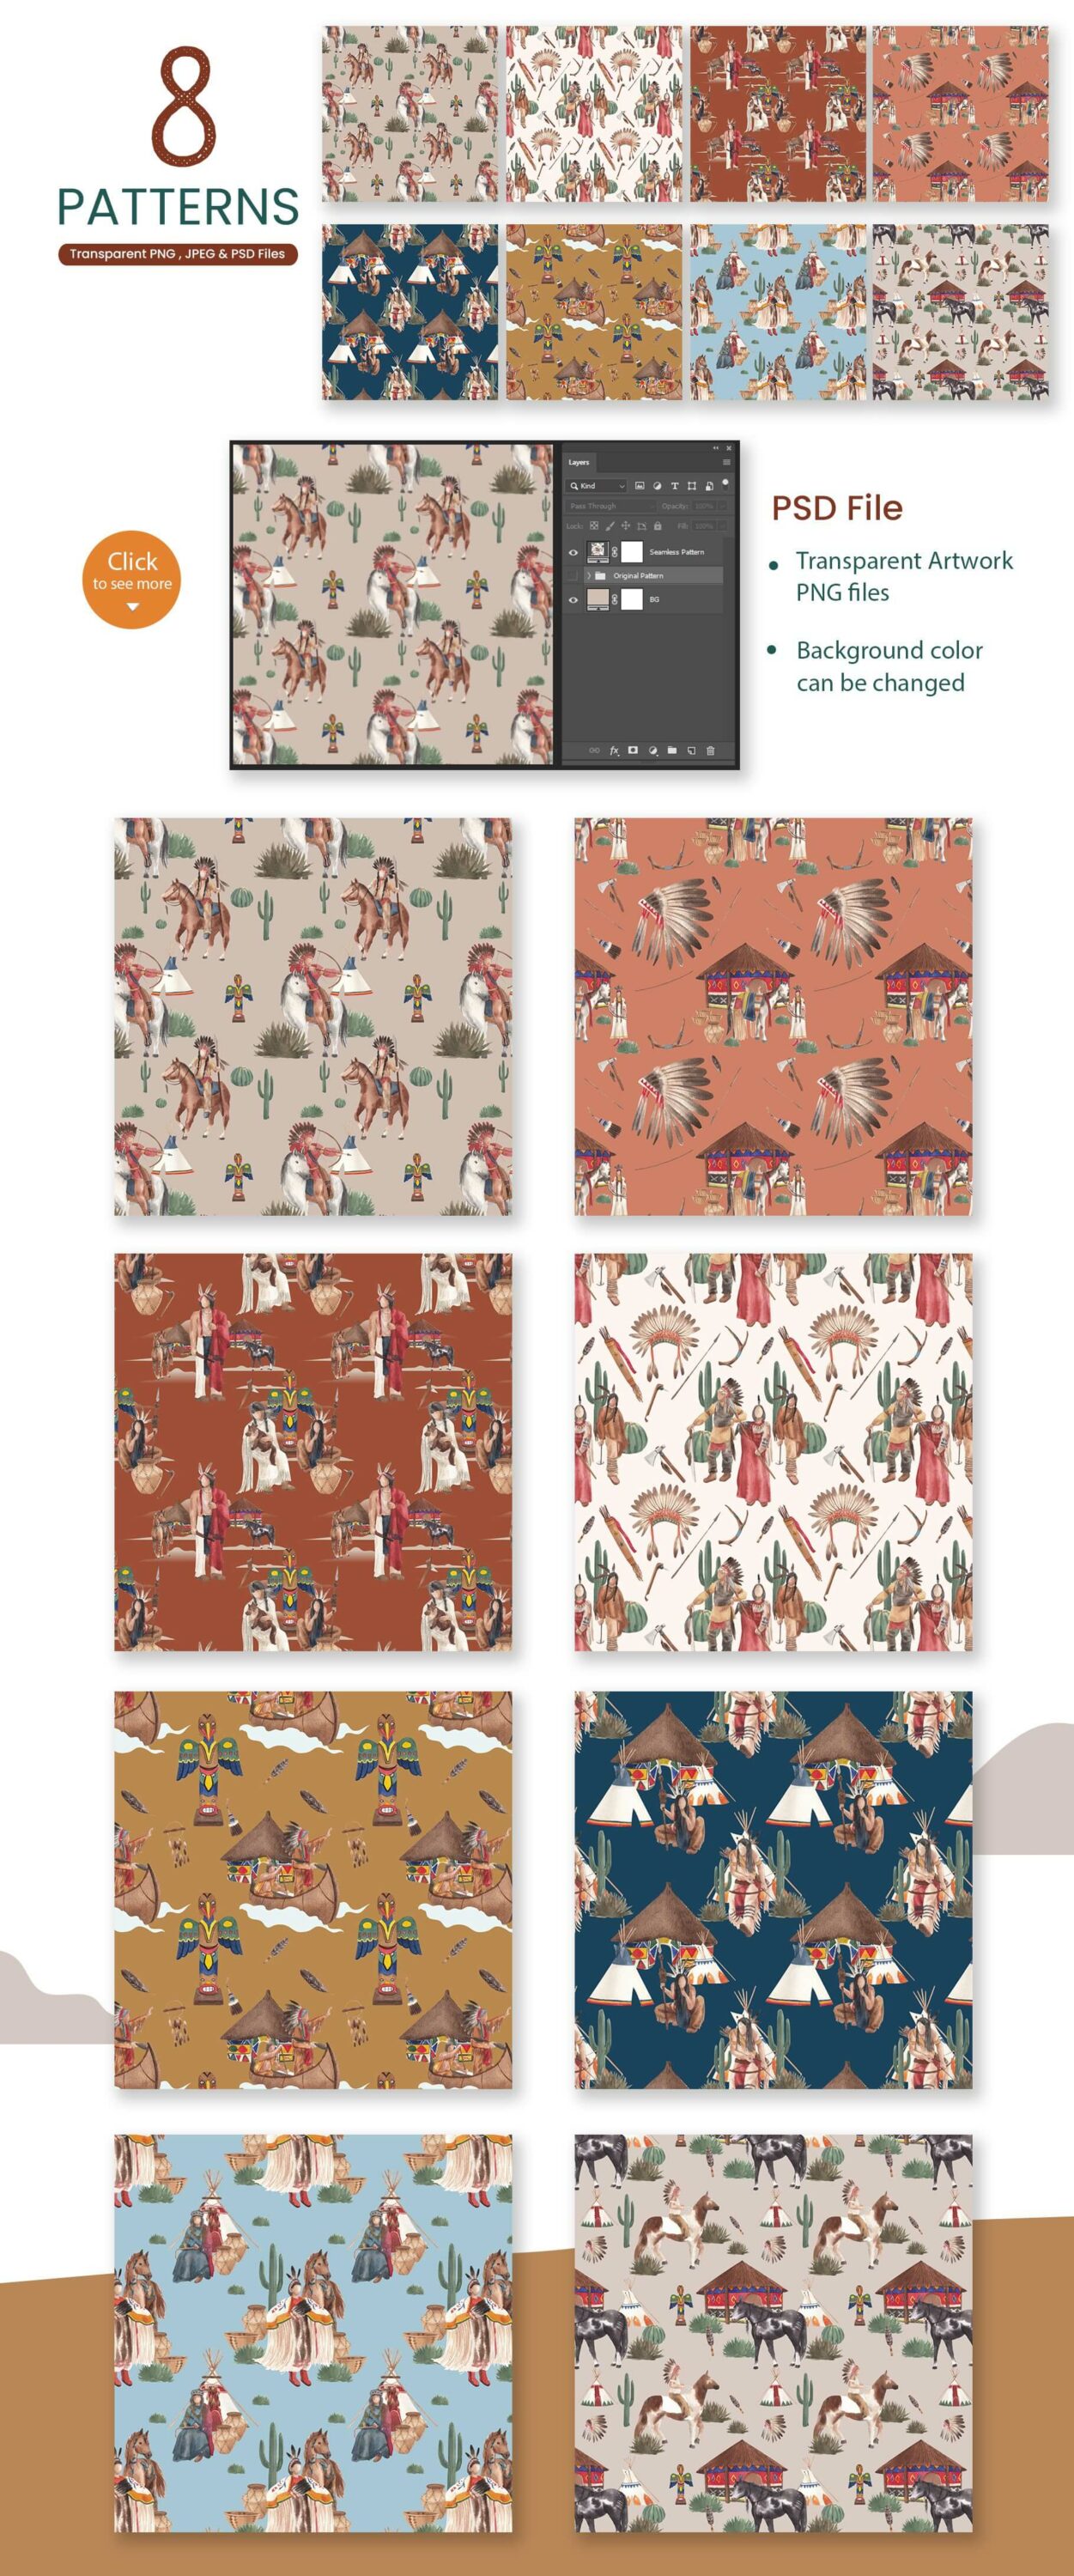 native americans vintage style watercolor illustration pattern items